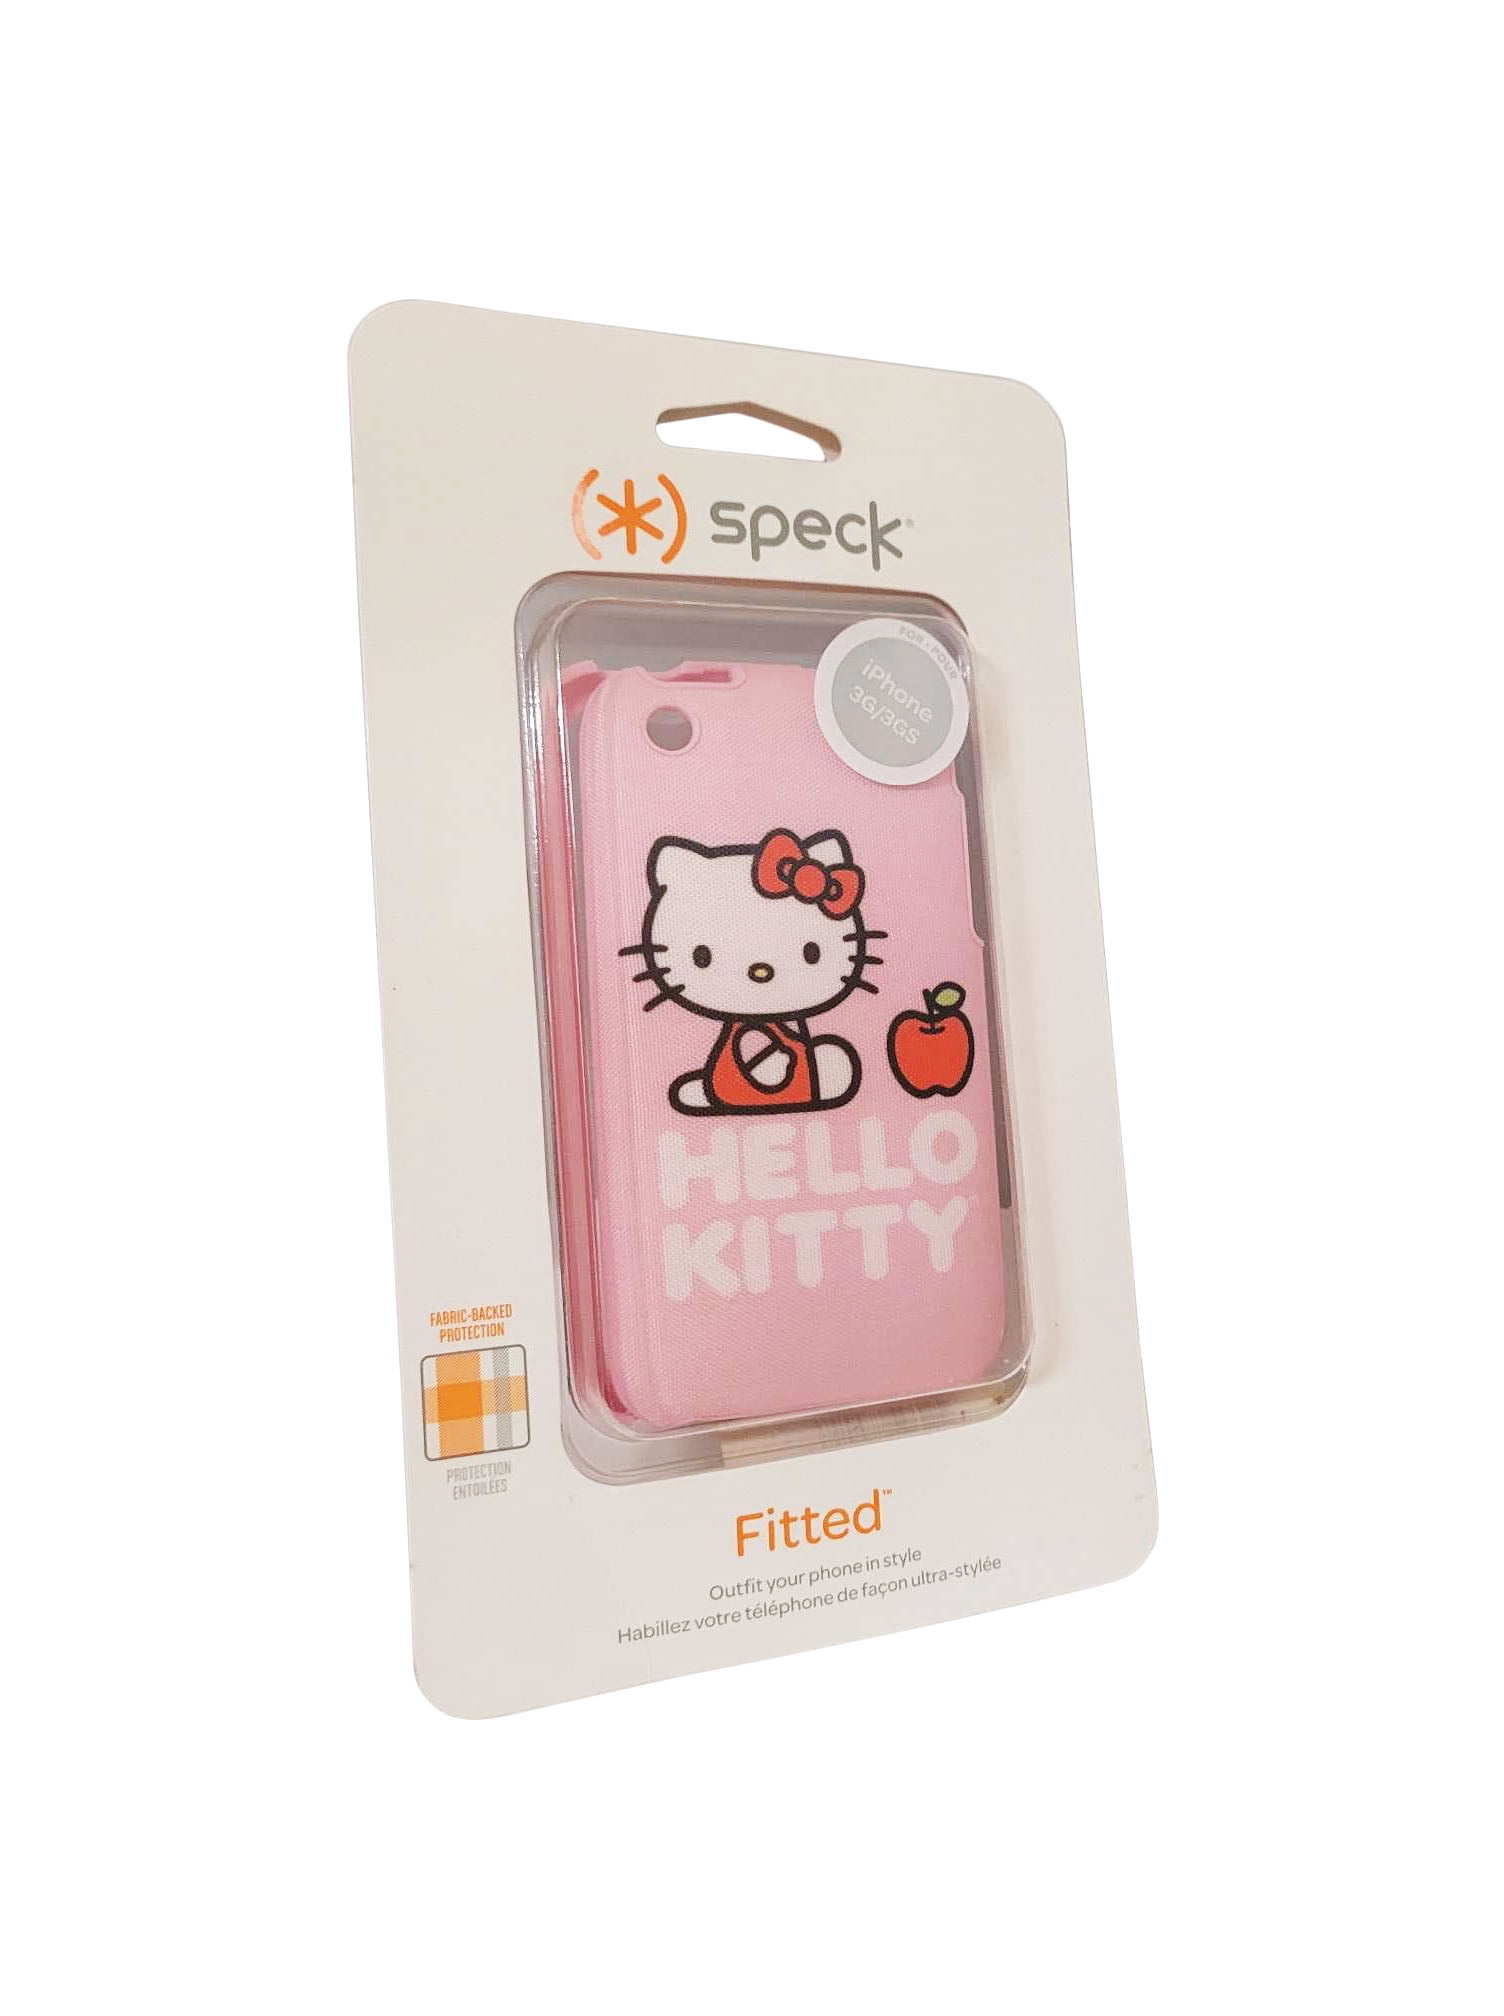 Speck HELLO KITTY Case for Apple iPhone 3G/3GS (Pink) SPK-A1000 